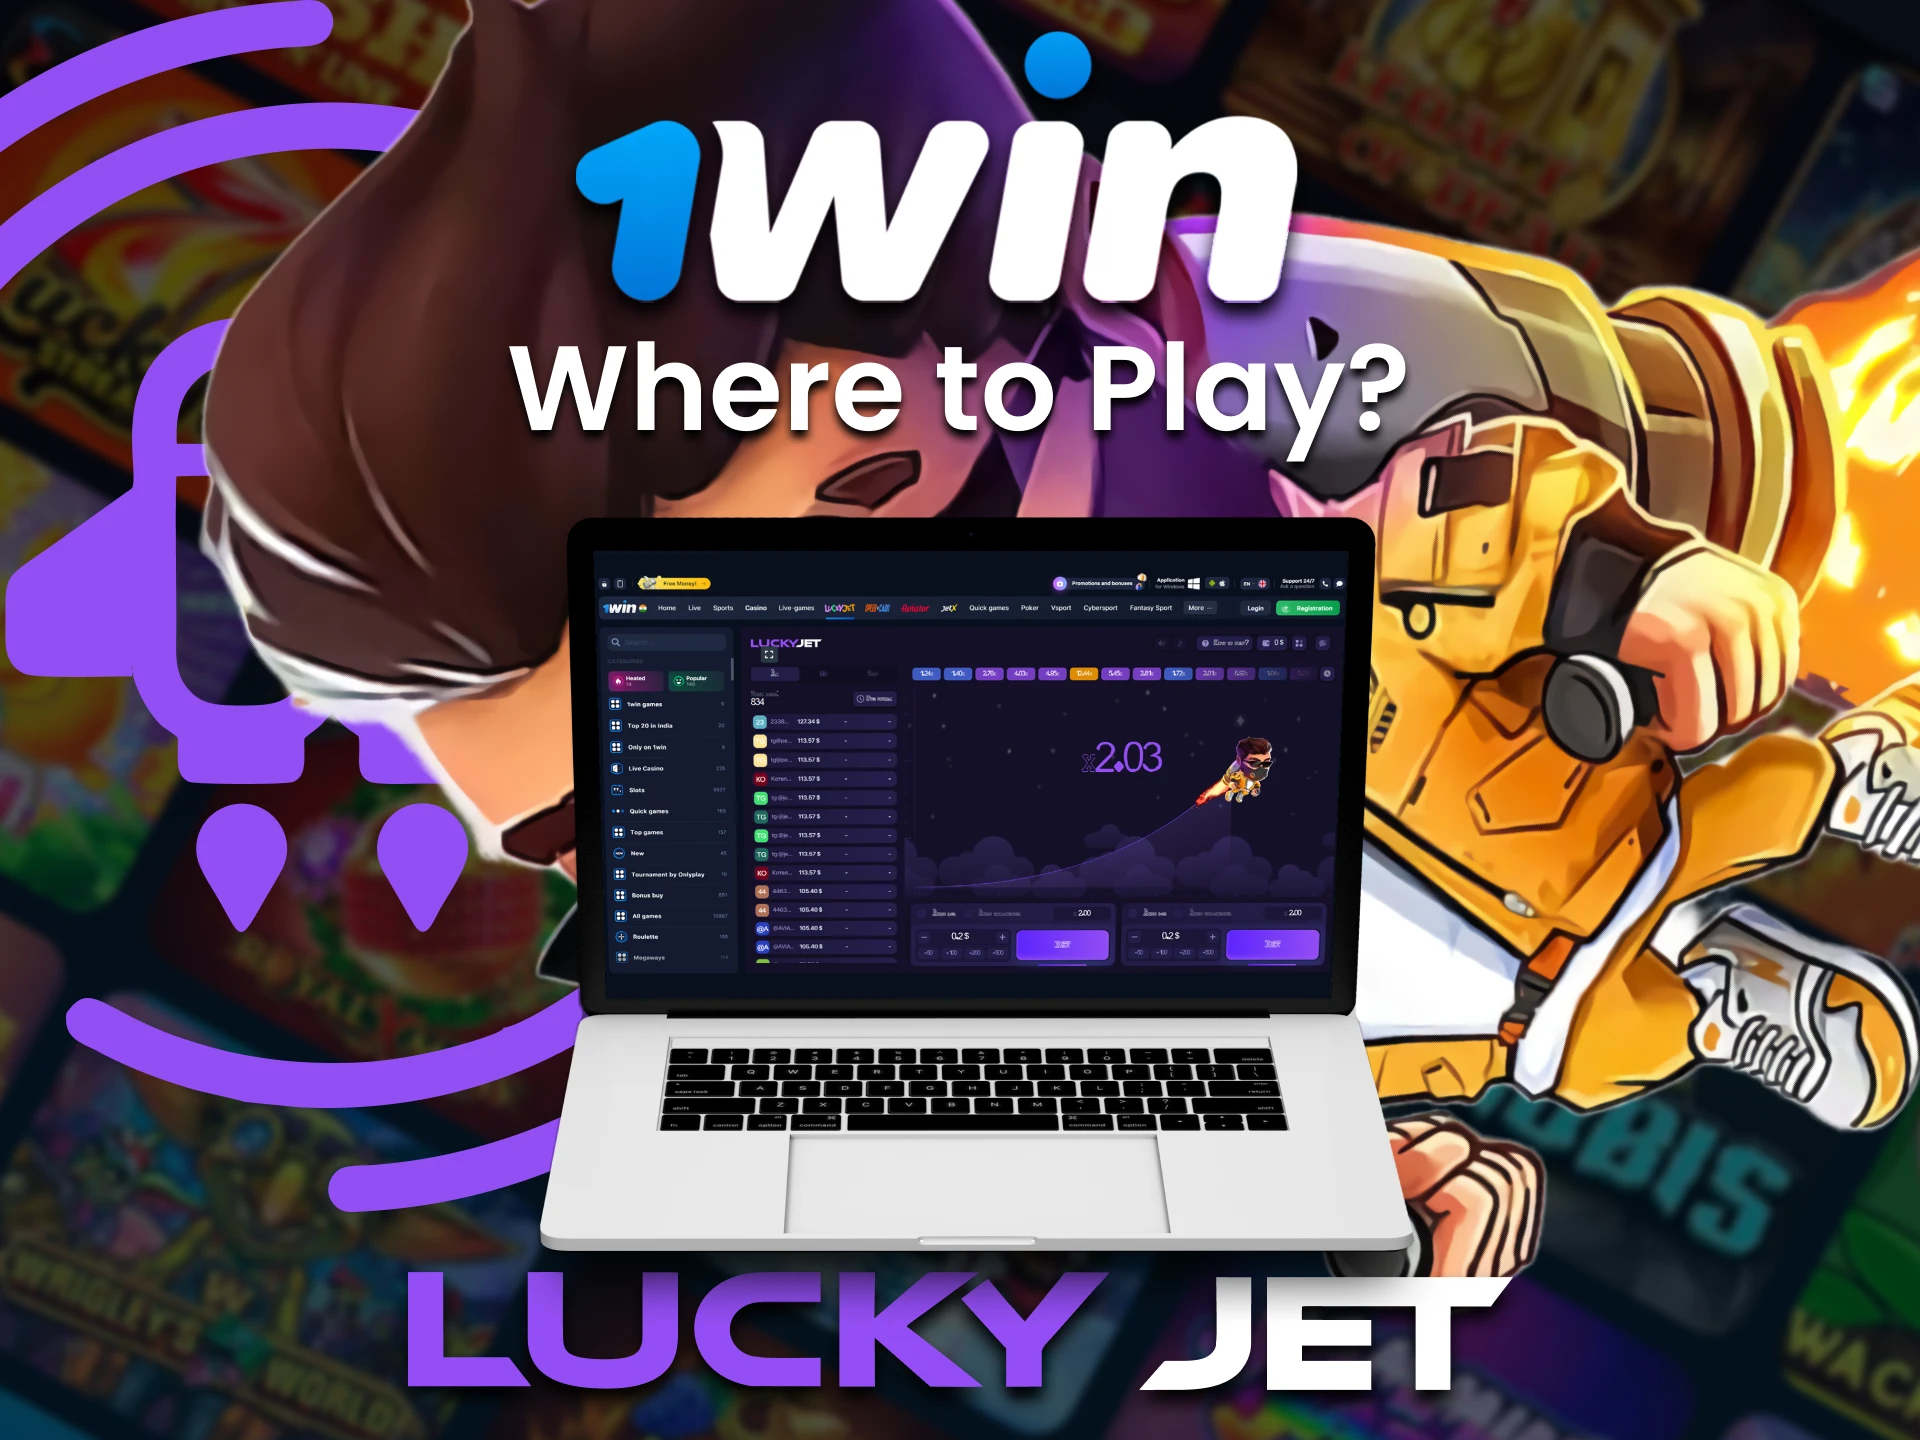 You can play Lucky Jet 1Win on PC and in mobile apps for Android and iOS.